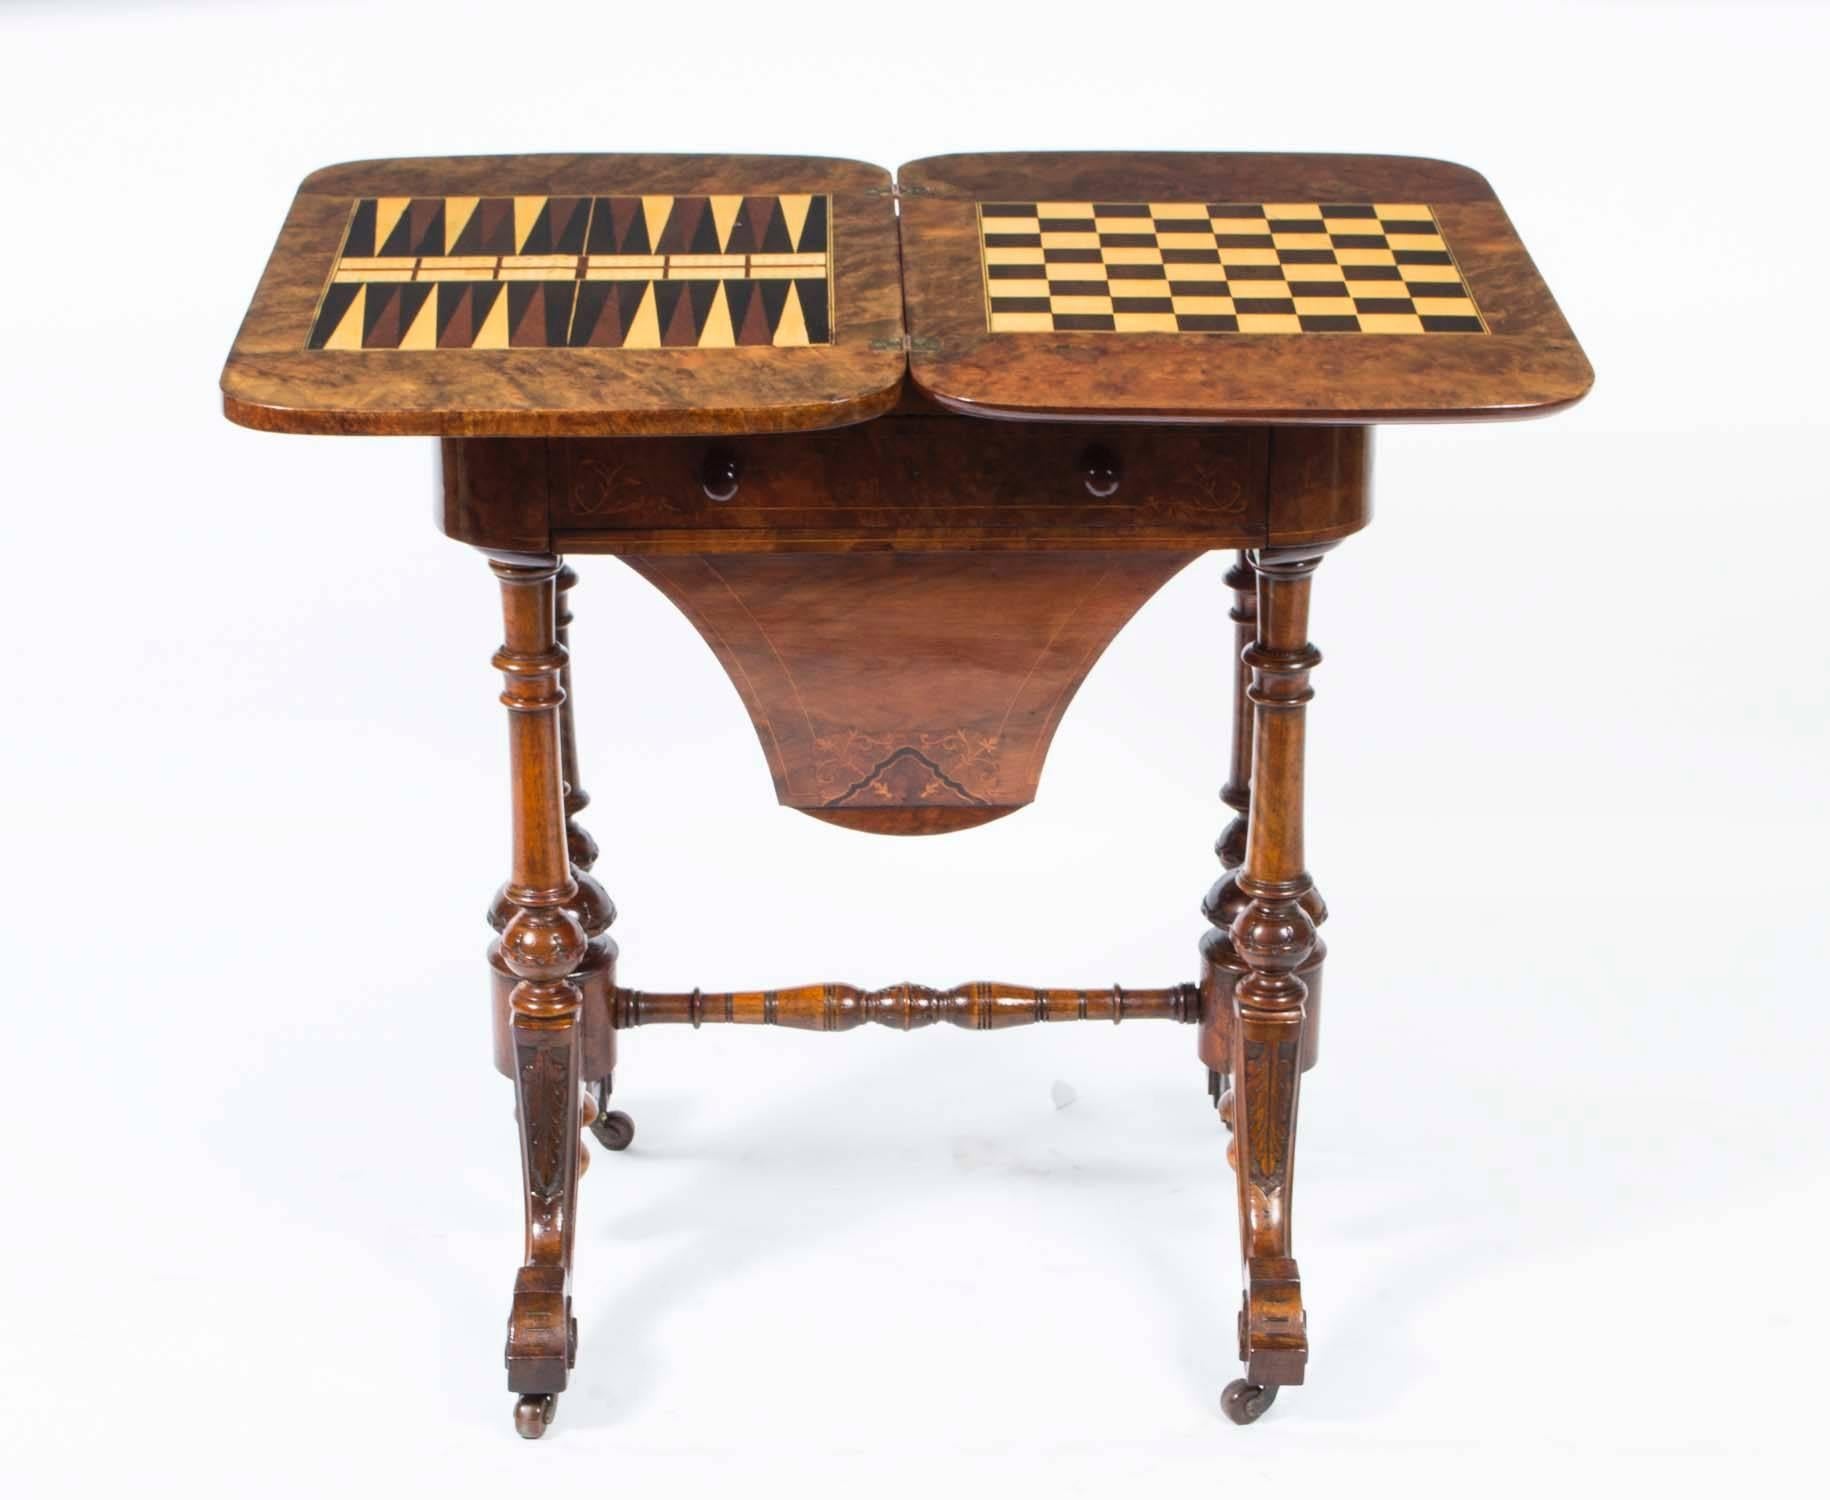 This is a fabulous antique Victorian burr walnut games and work table, circa 1870 in date.

It is made of beautiful burr walnut that has elegant satinwood line inlaid decoration with ebonized highlights.

The hinged top opens to reveal a